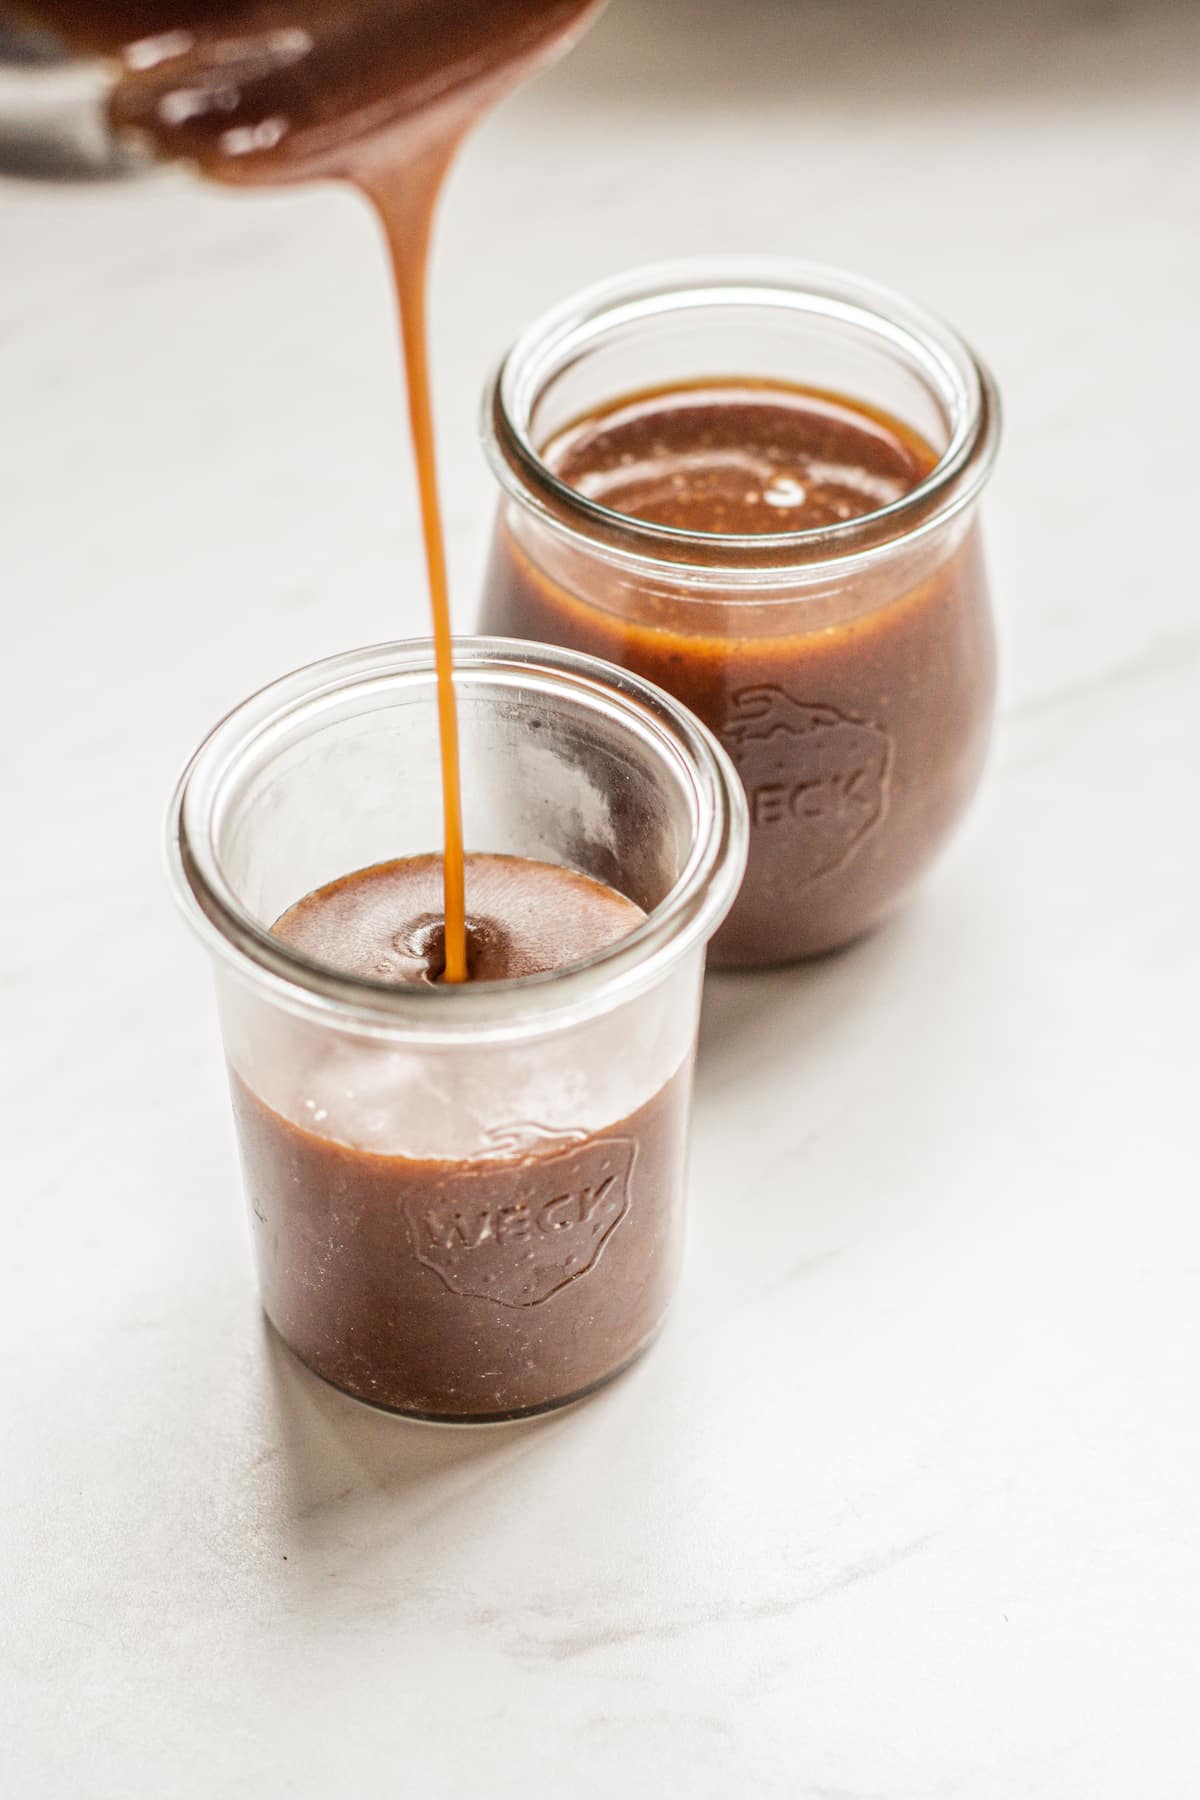 caramel sauce being poured into jars.